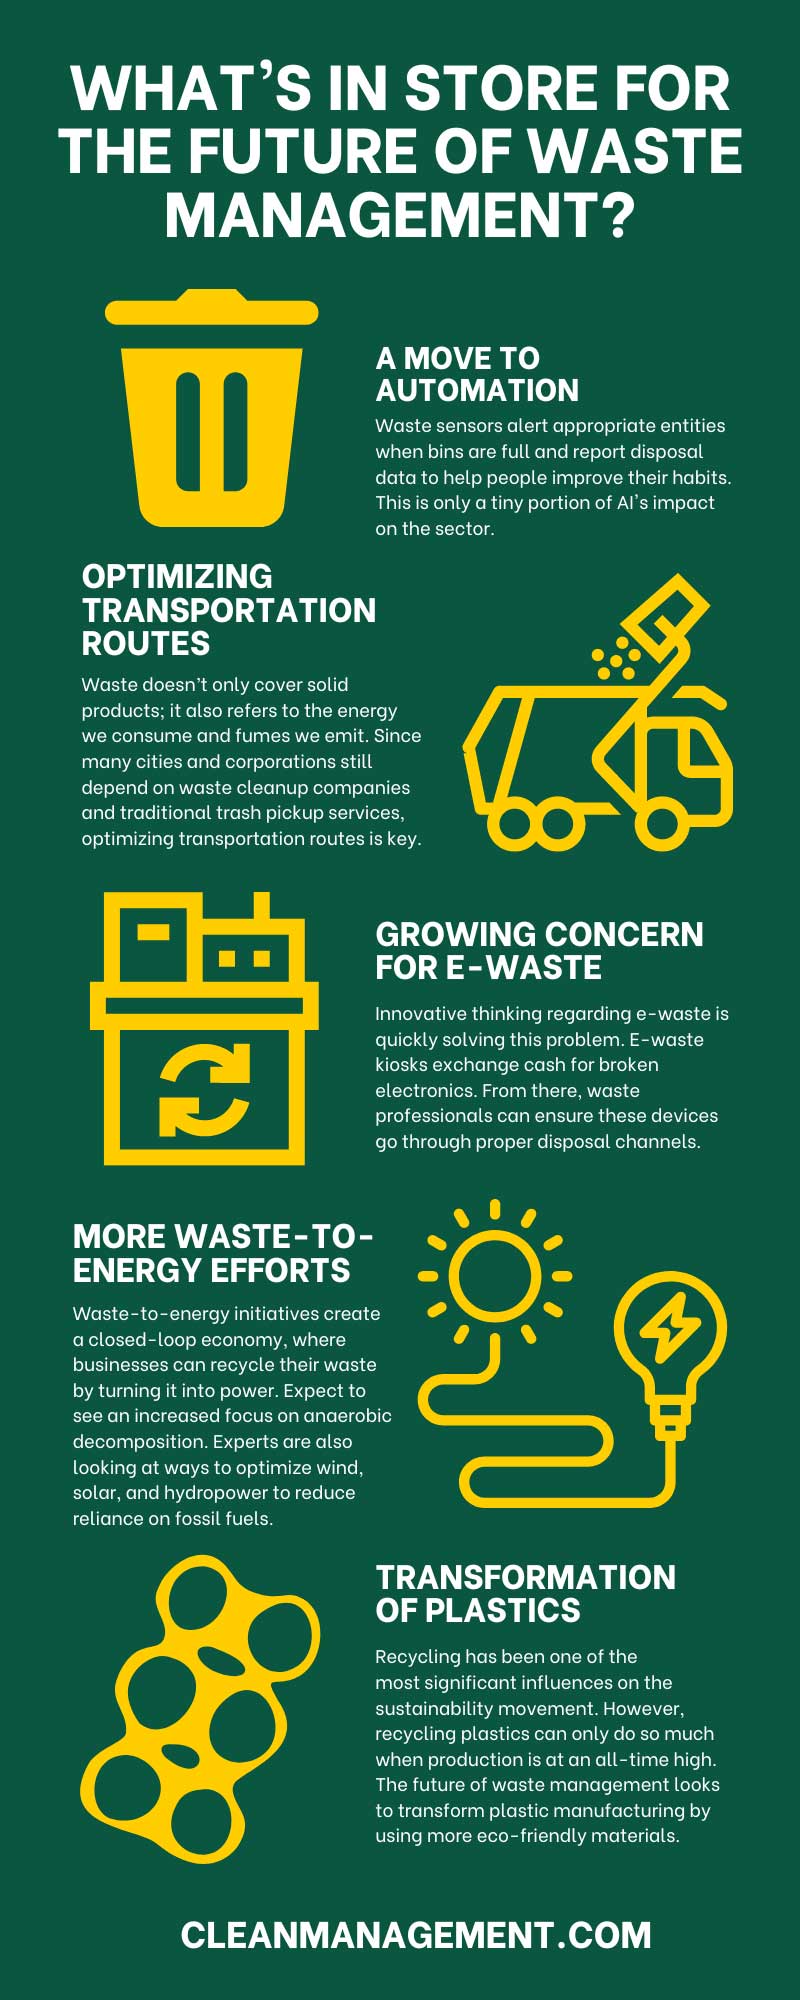 What’s in Store for the Future of Waste Management?